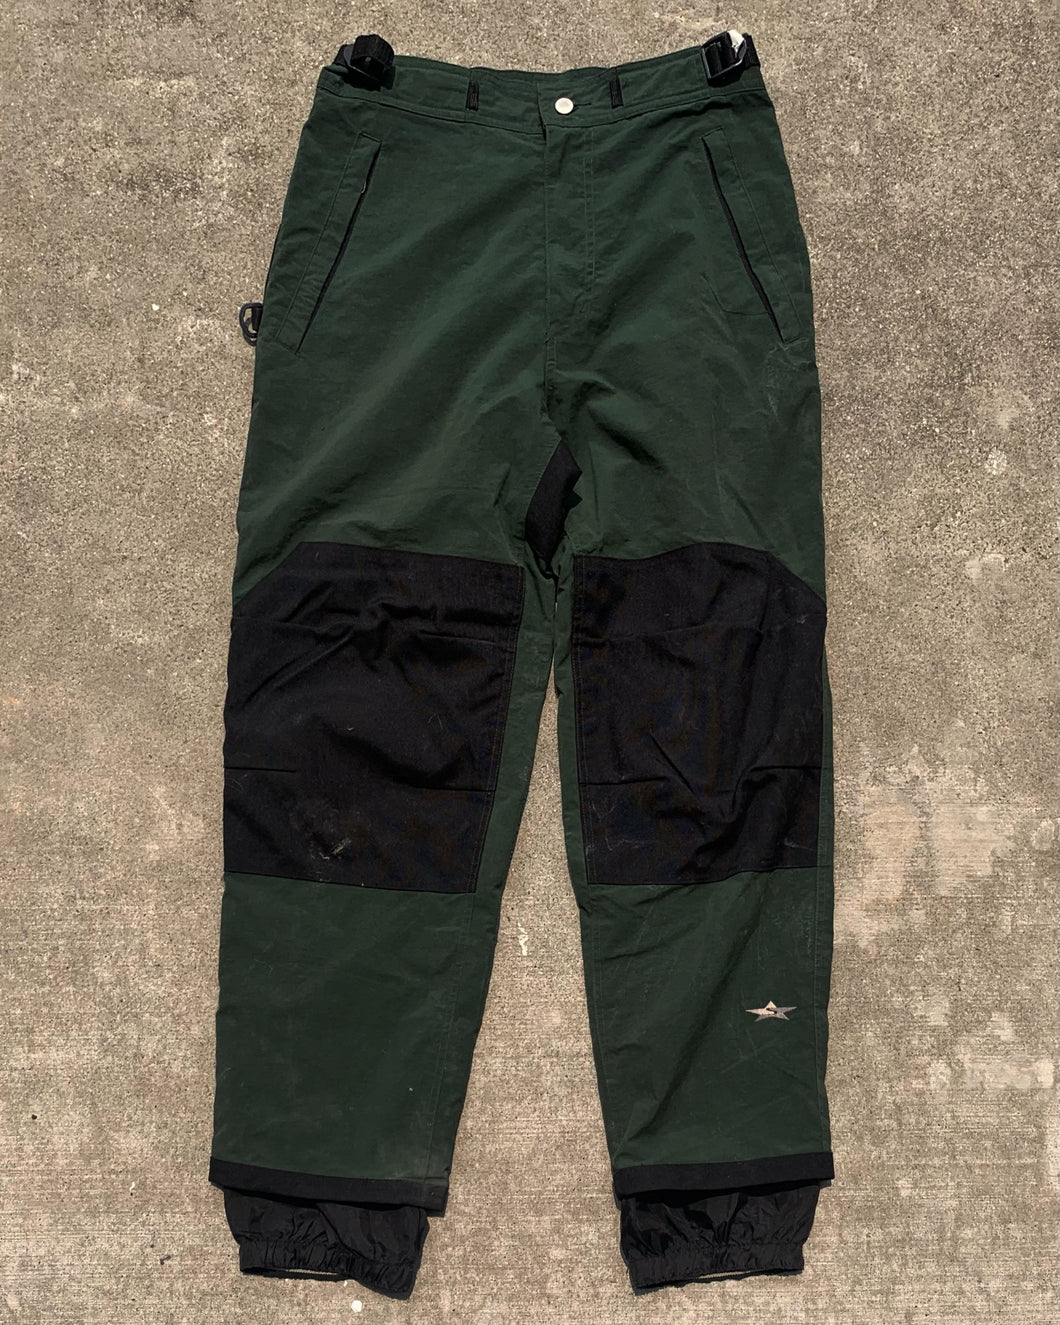 Vintage 90's Green-Black Panel Insulated Snow Pants